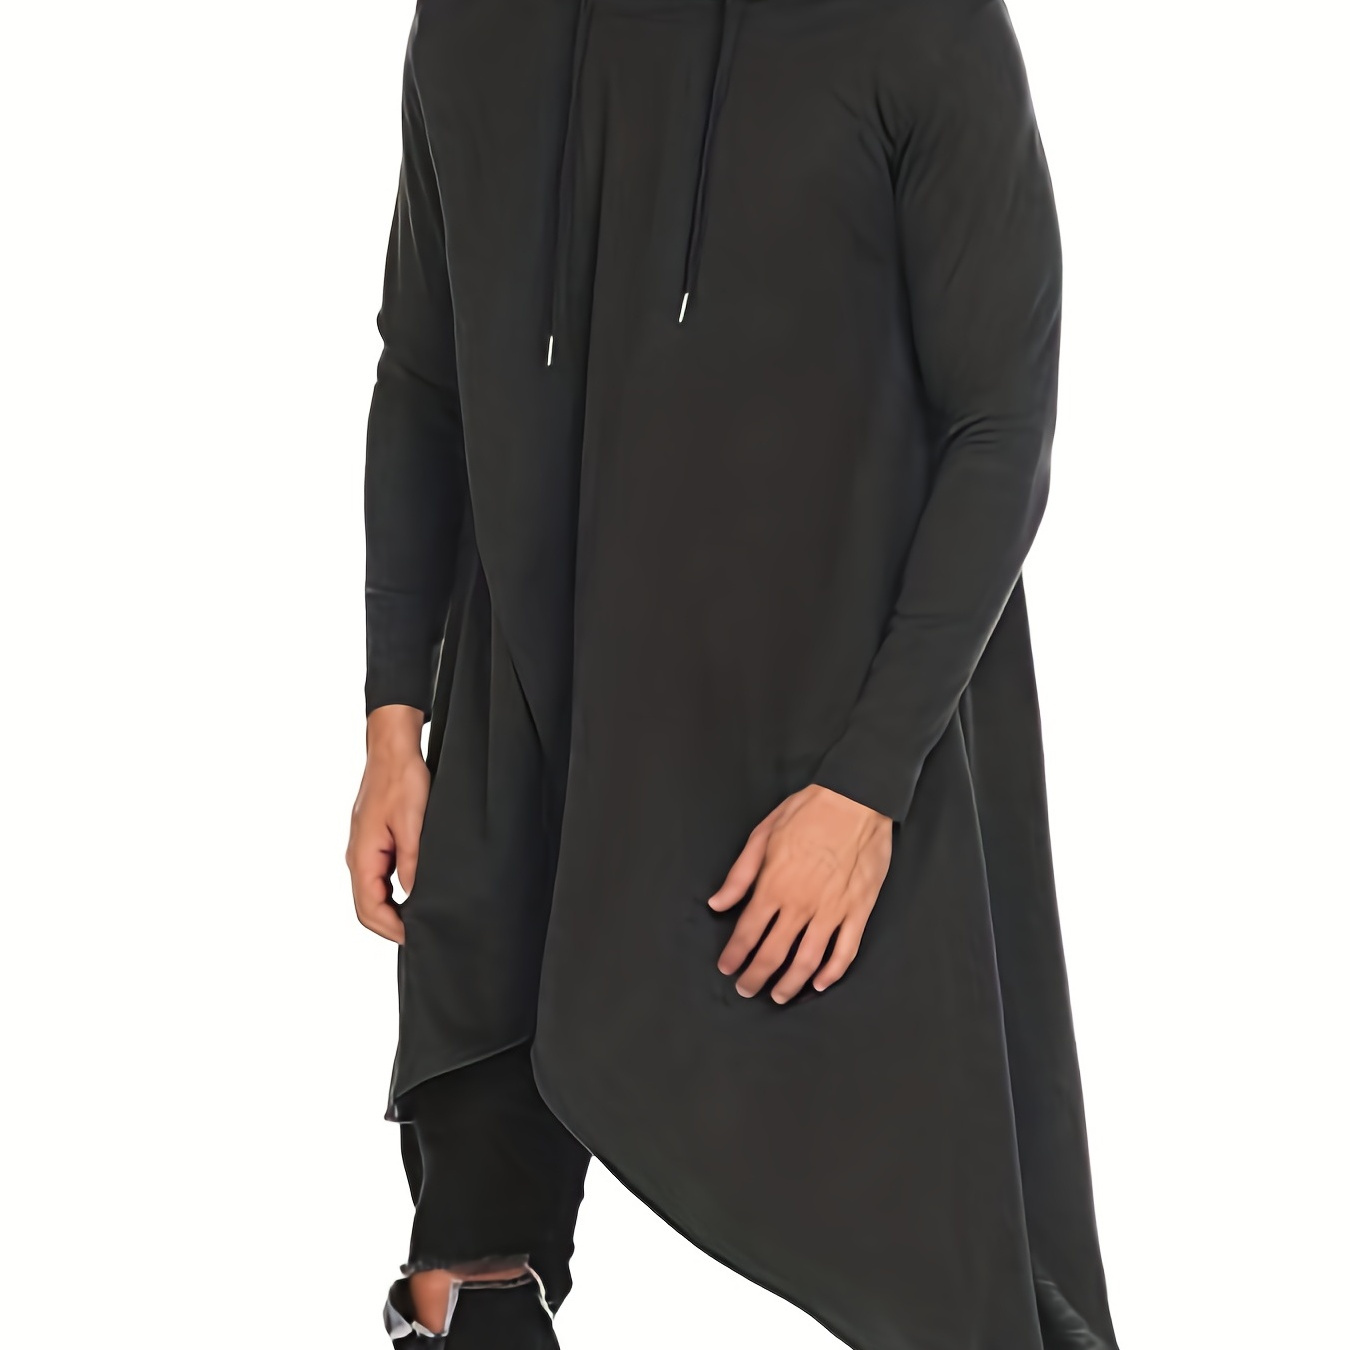 Plus Size Mens Casual Poncho Hooded Cape Cloak Asymmetric Hem Pullover Hoodie Sweatshirts, Solid Irregular Design Clothes